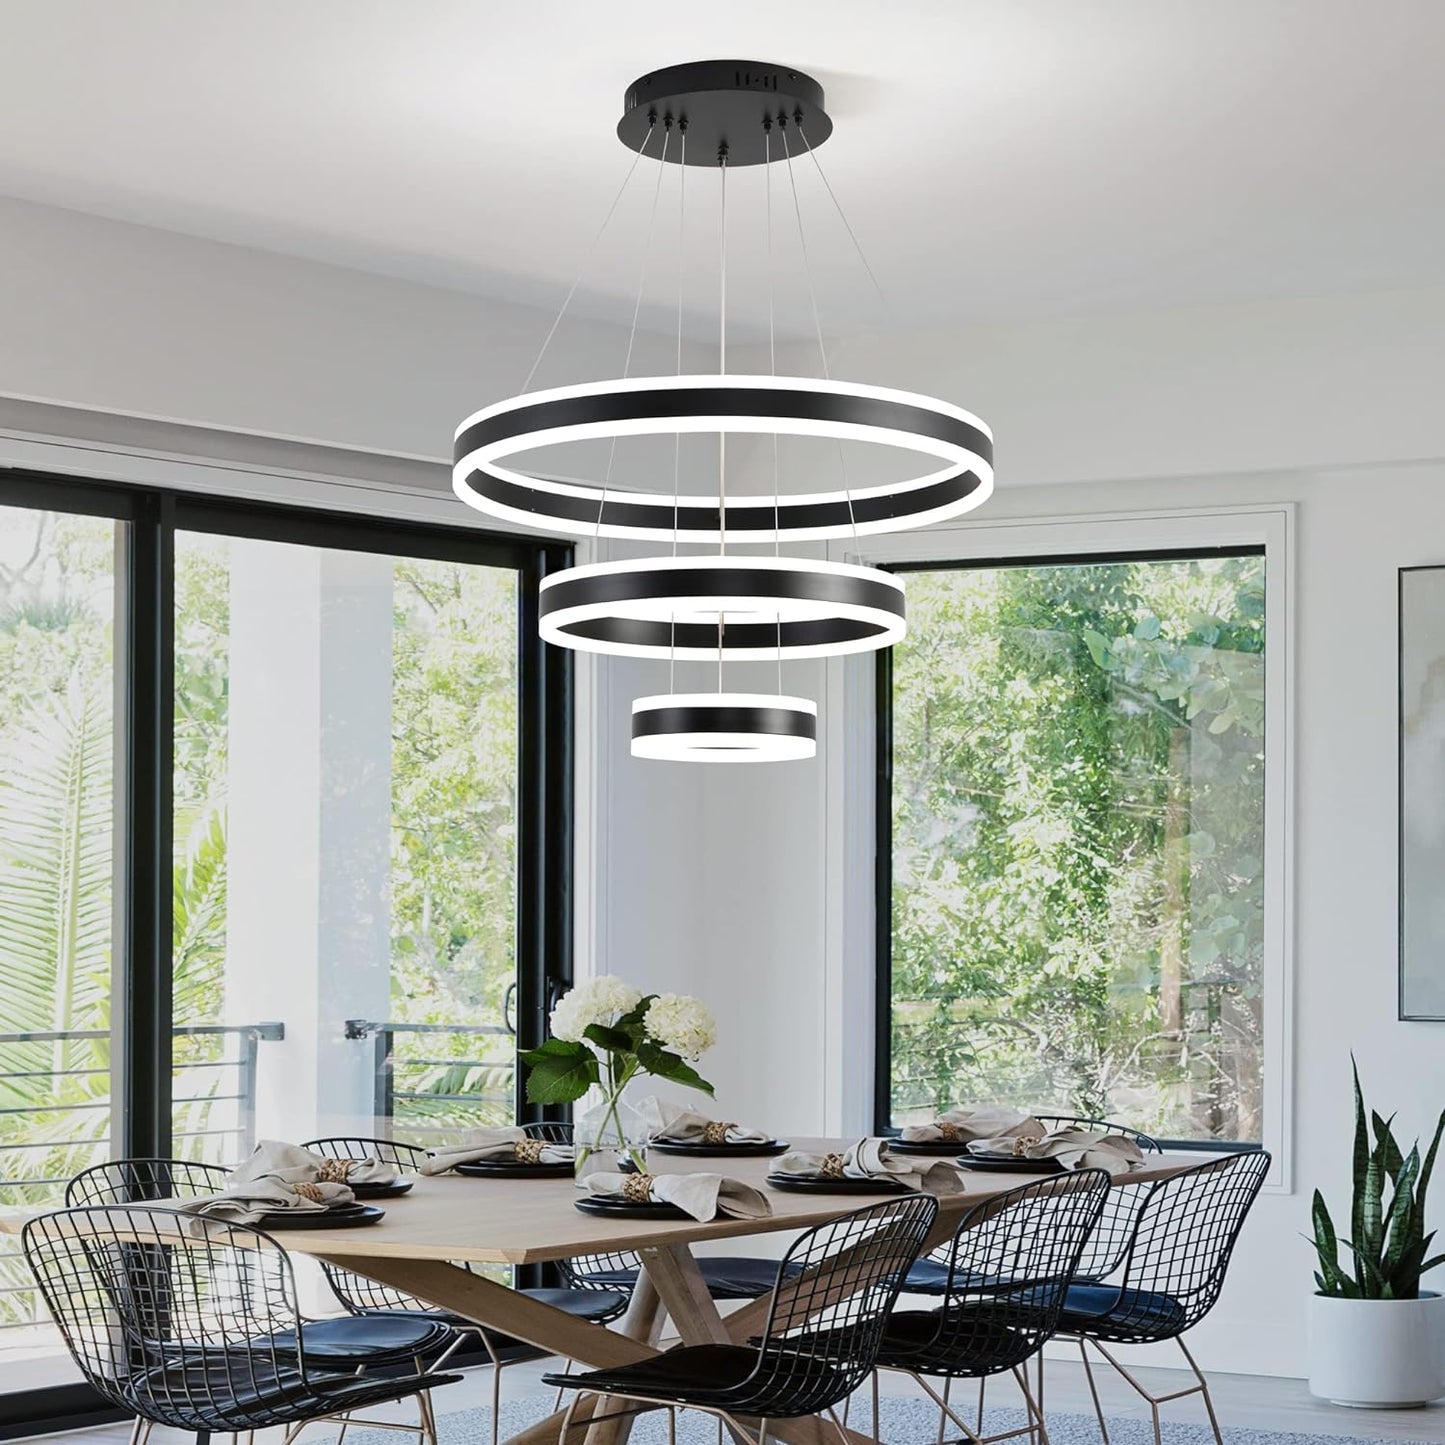 Upfelw Modern Dimmable Led Chandelier with 3 Ring, D23.7'' Adjustable Contemporary Hanging Ceiling Light Fixture for Living Room Bedroom Dining Room with Remote Co